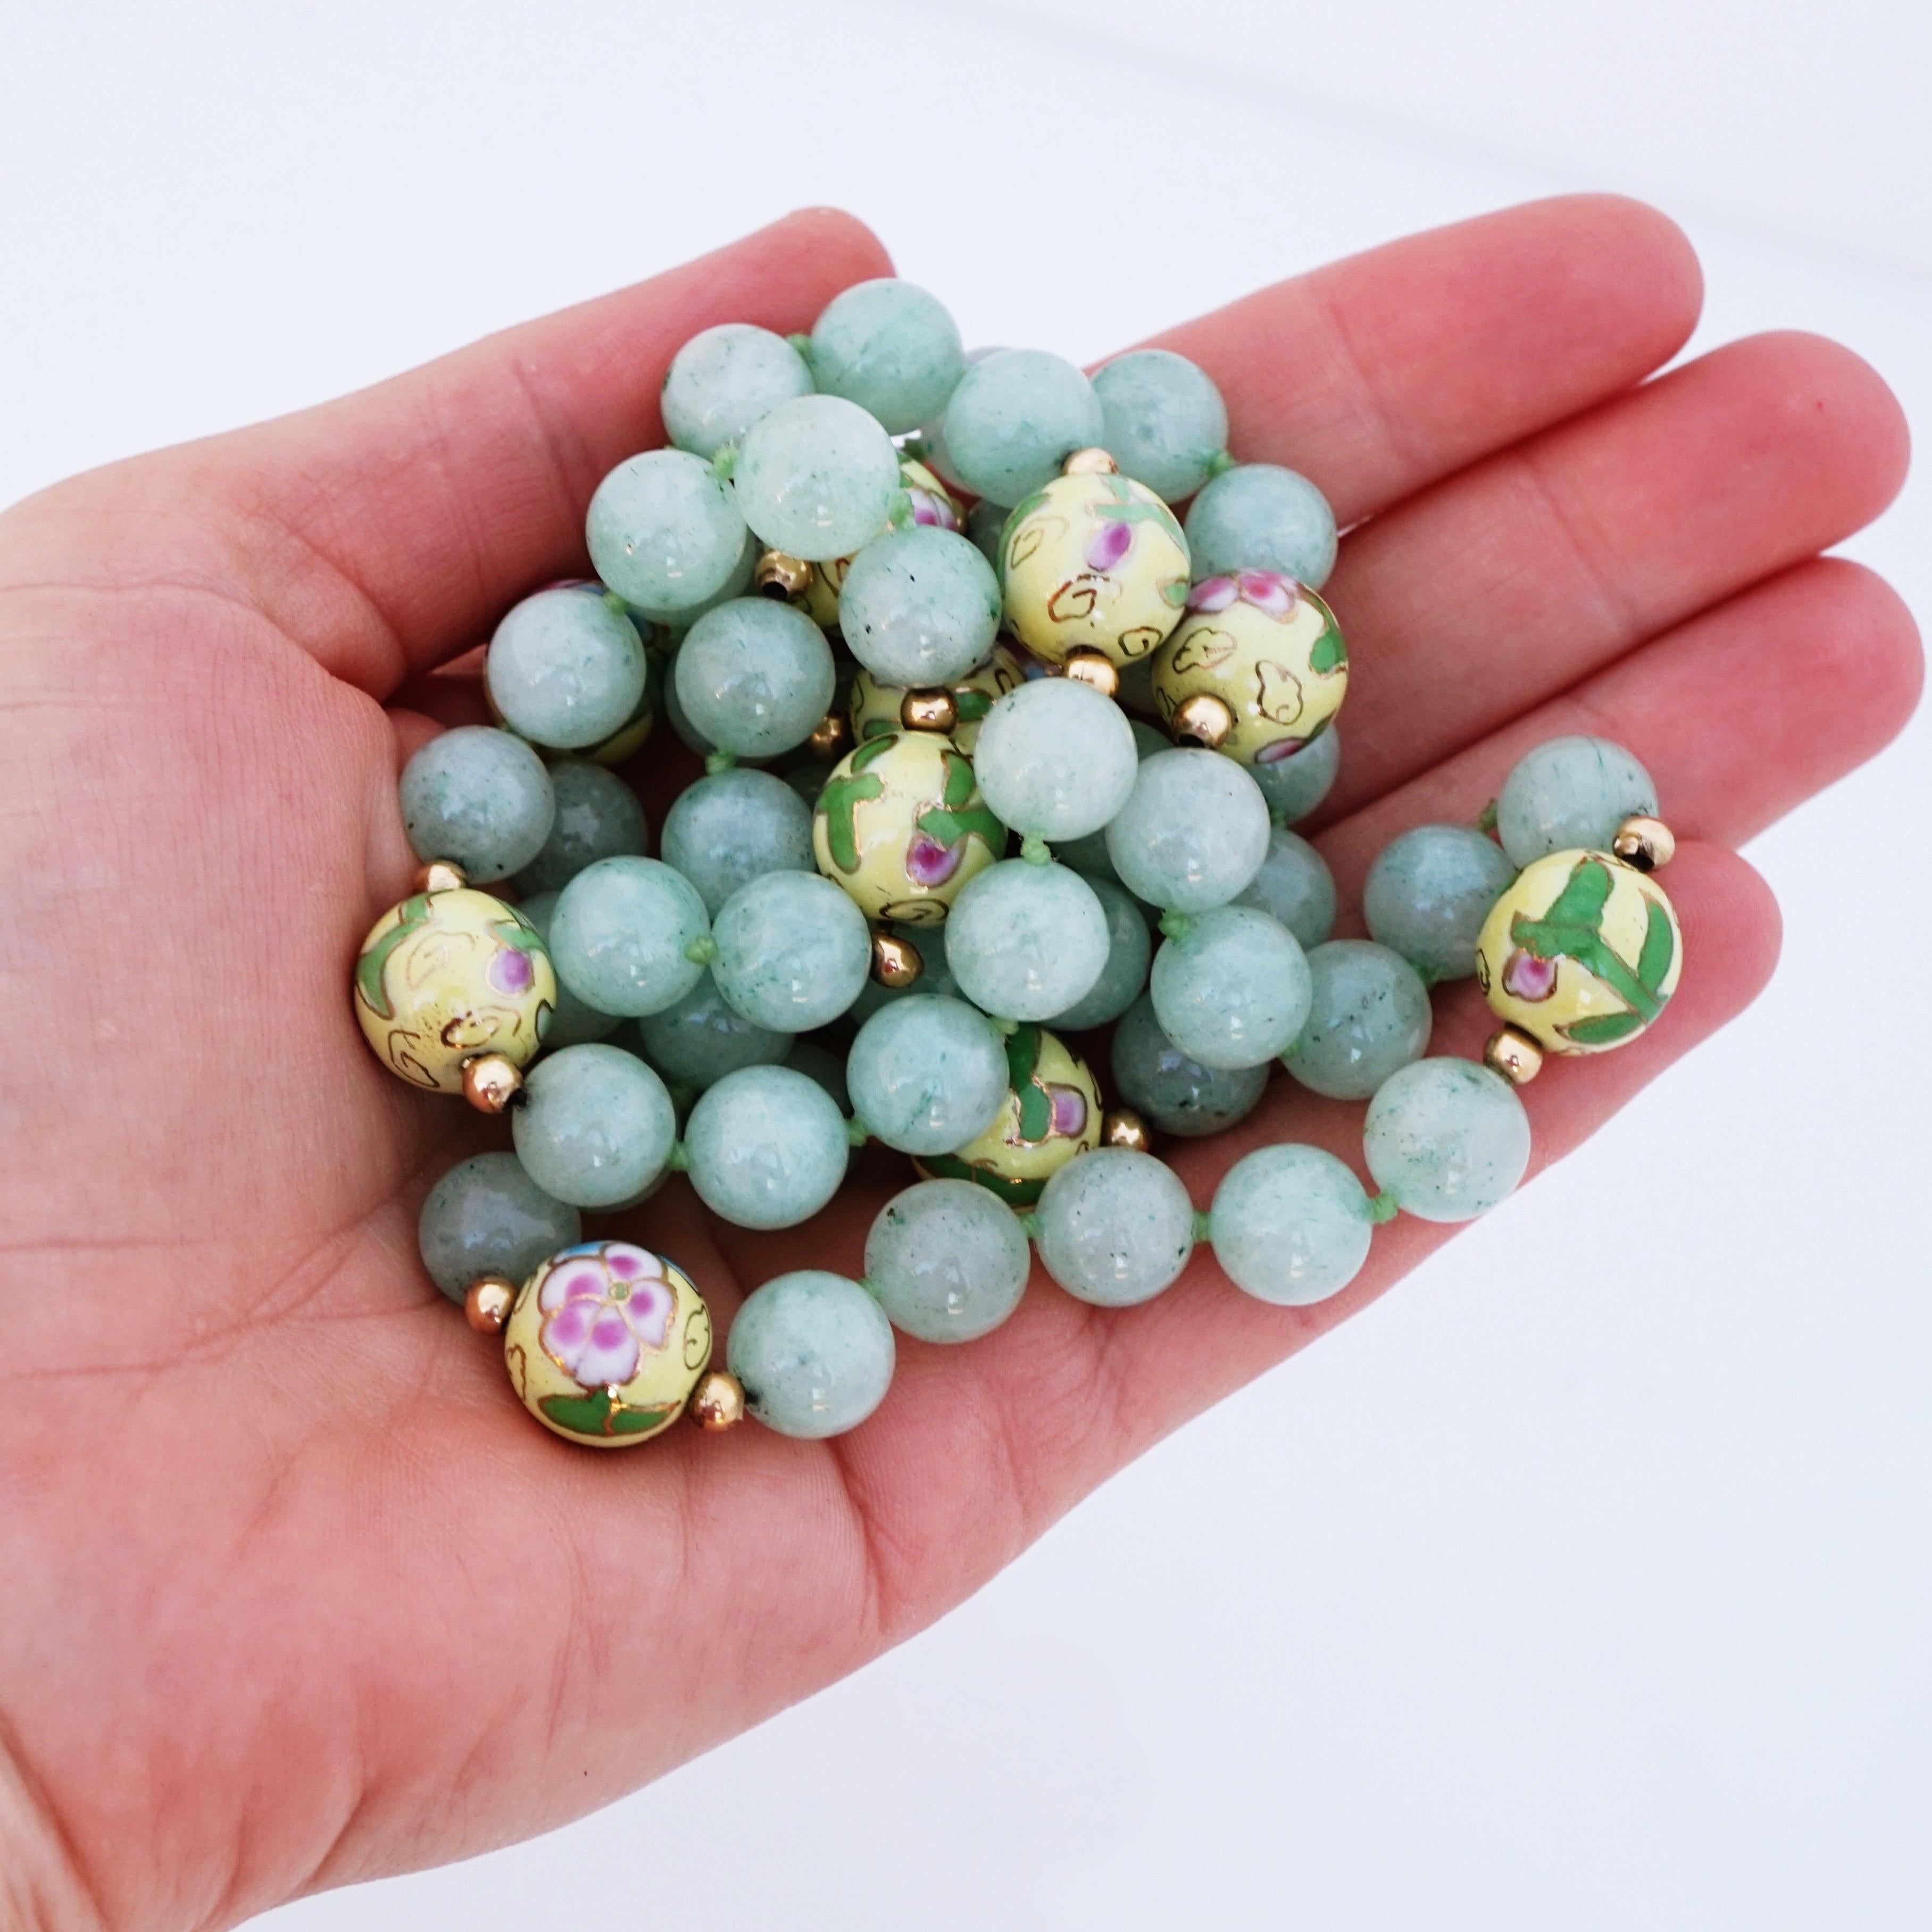 Women's Chinese Jade Gemstone Necklace With Cloisonné Enamel Floral Accent Beads, 1950s For Sale